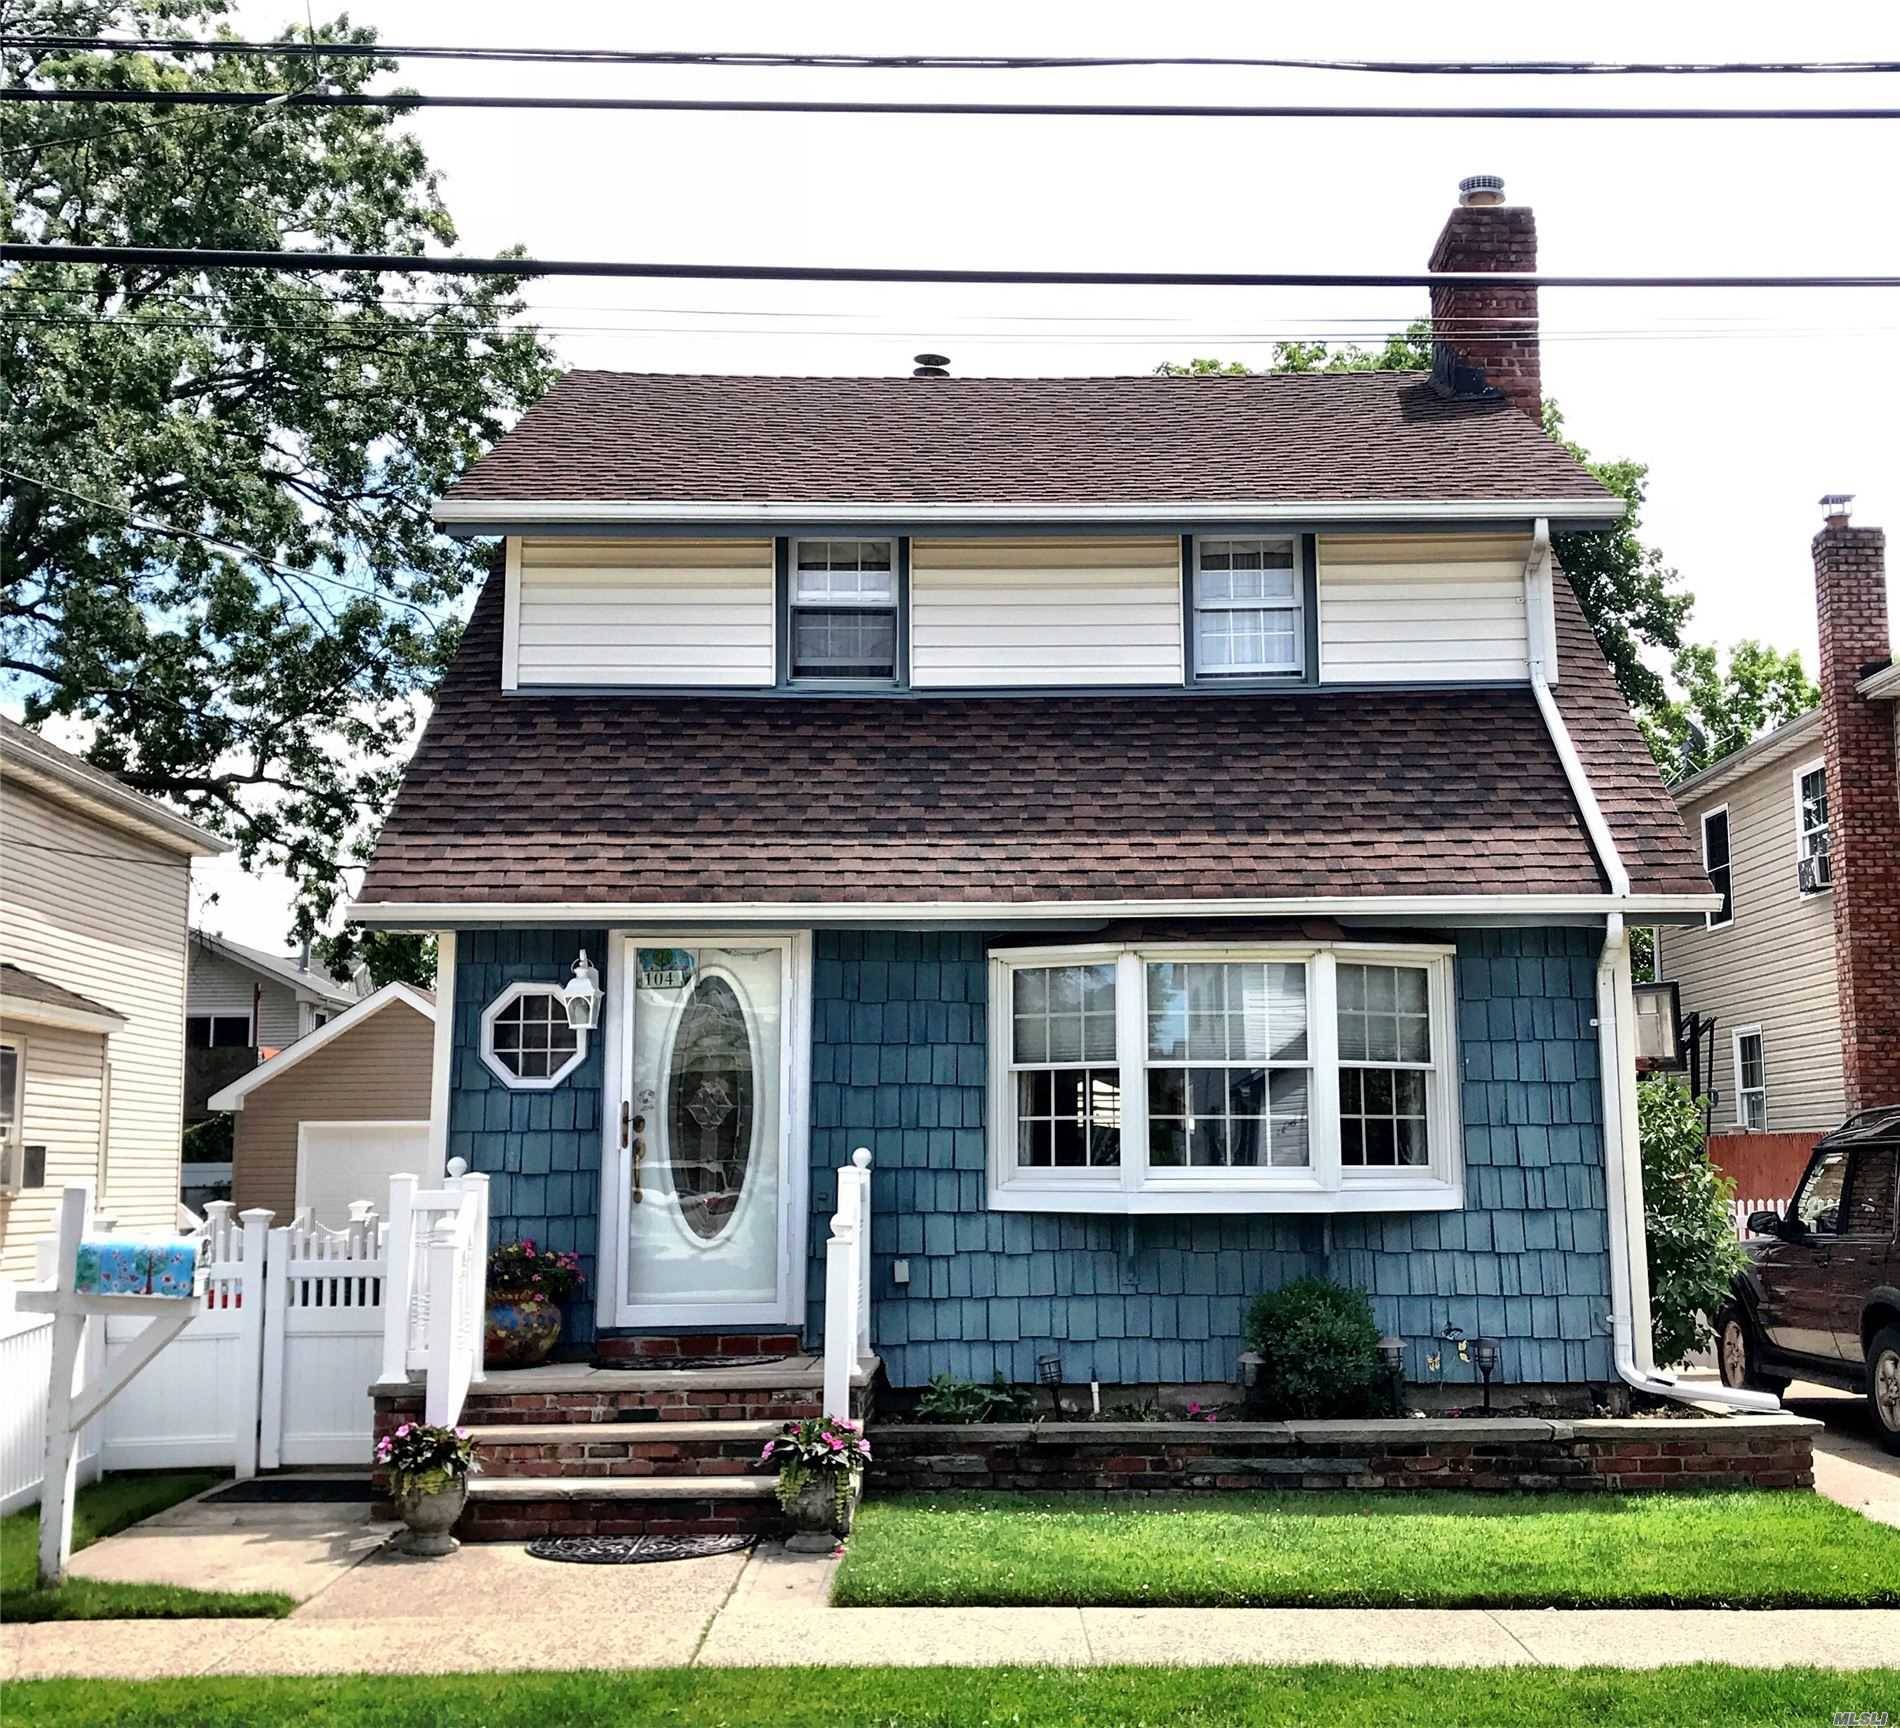 Lovely Dutch Colonial, Located North of Hempstead Tpke in desired Franklin Square.